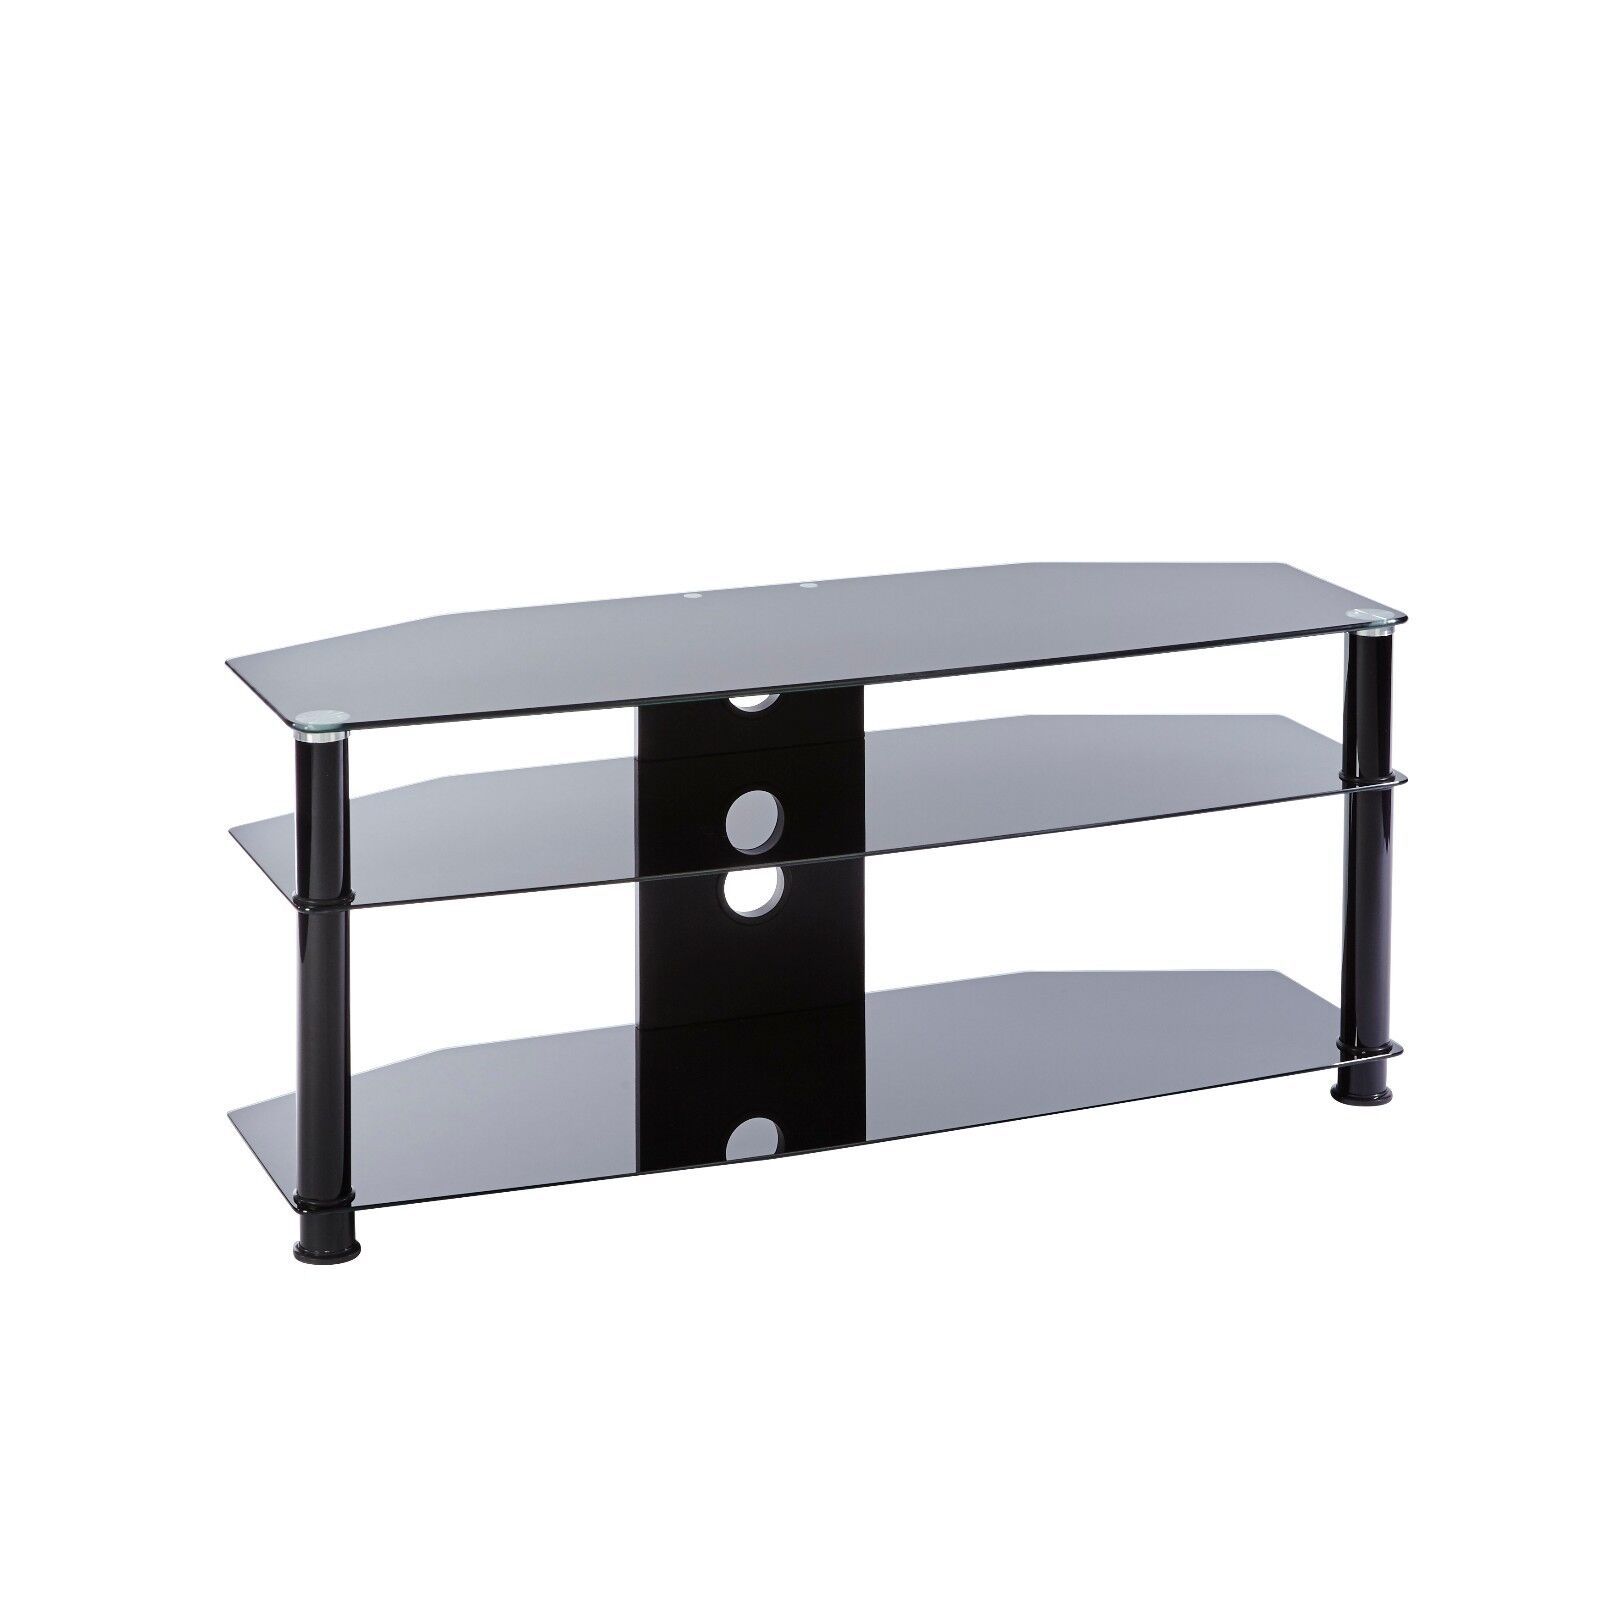 Black Glass Tv Stand 3 Tier Shelf Unit 115cm Fits 42 50 55 Inch Led Lcd Regarding Tier Stands For Tvs (Gallery 19 of 20)